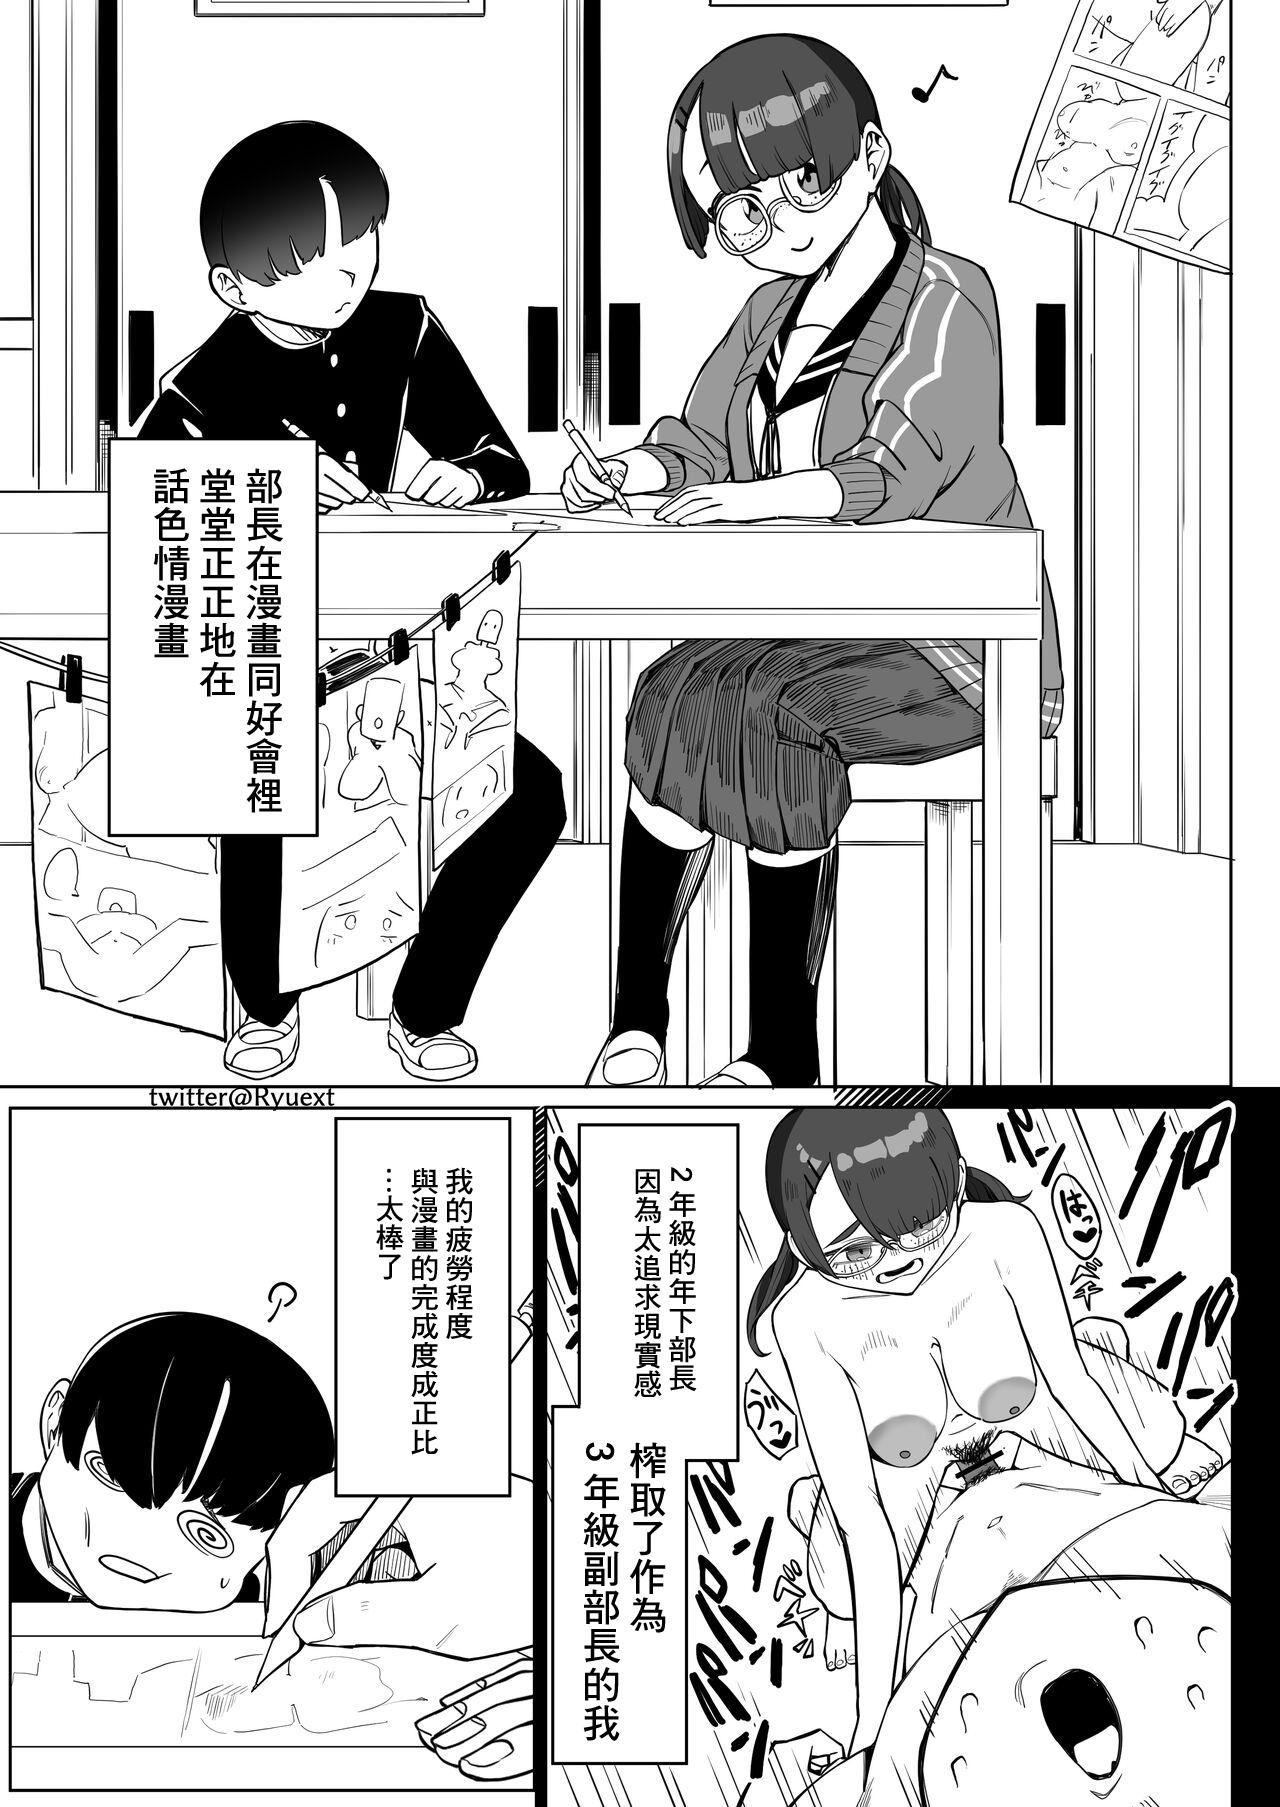 Taiwan 擬音収集マンガ - Original Roughsex - Picture 1